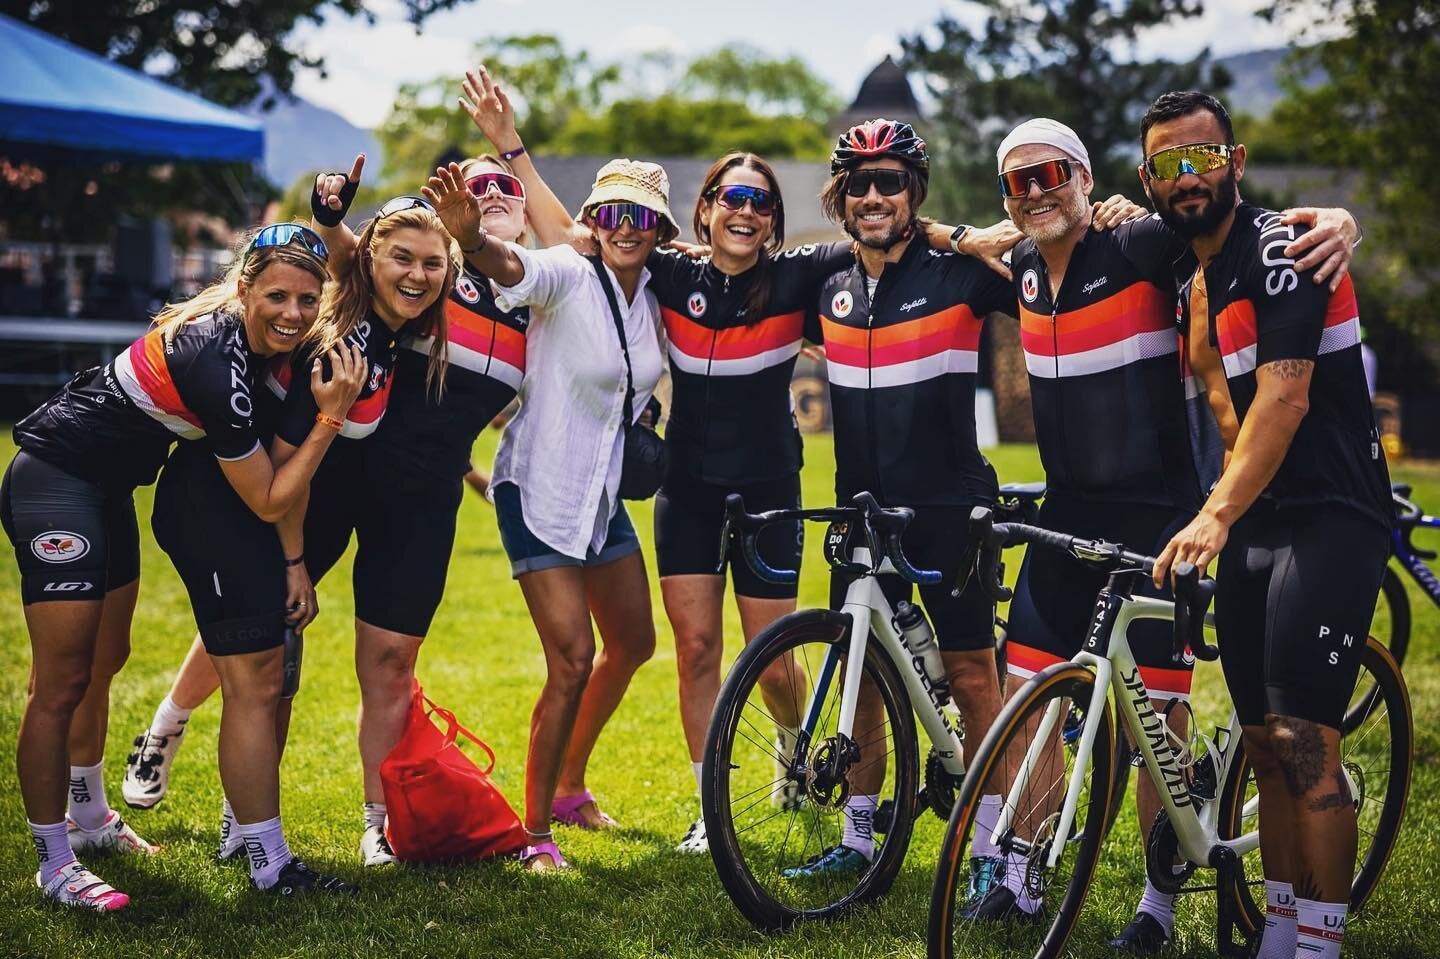 Absence truly does make the heart grow fonder! What a sensational event that we missed so much!!! A MASSIVE kudos to each of our 55 Lotus that came out for the @okanagan_granfondo and for so many STRONG 💪🏽 TEAM finishes. There are so many highlight